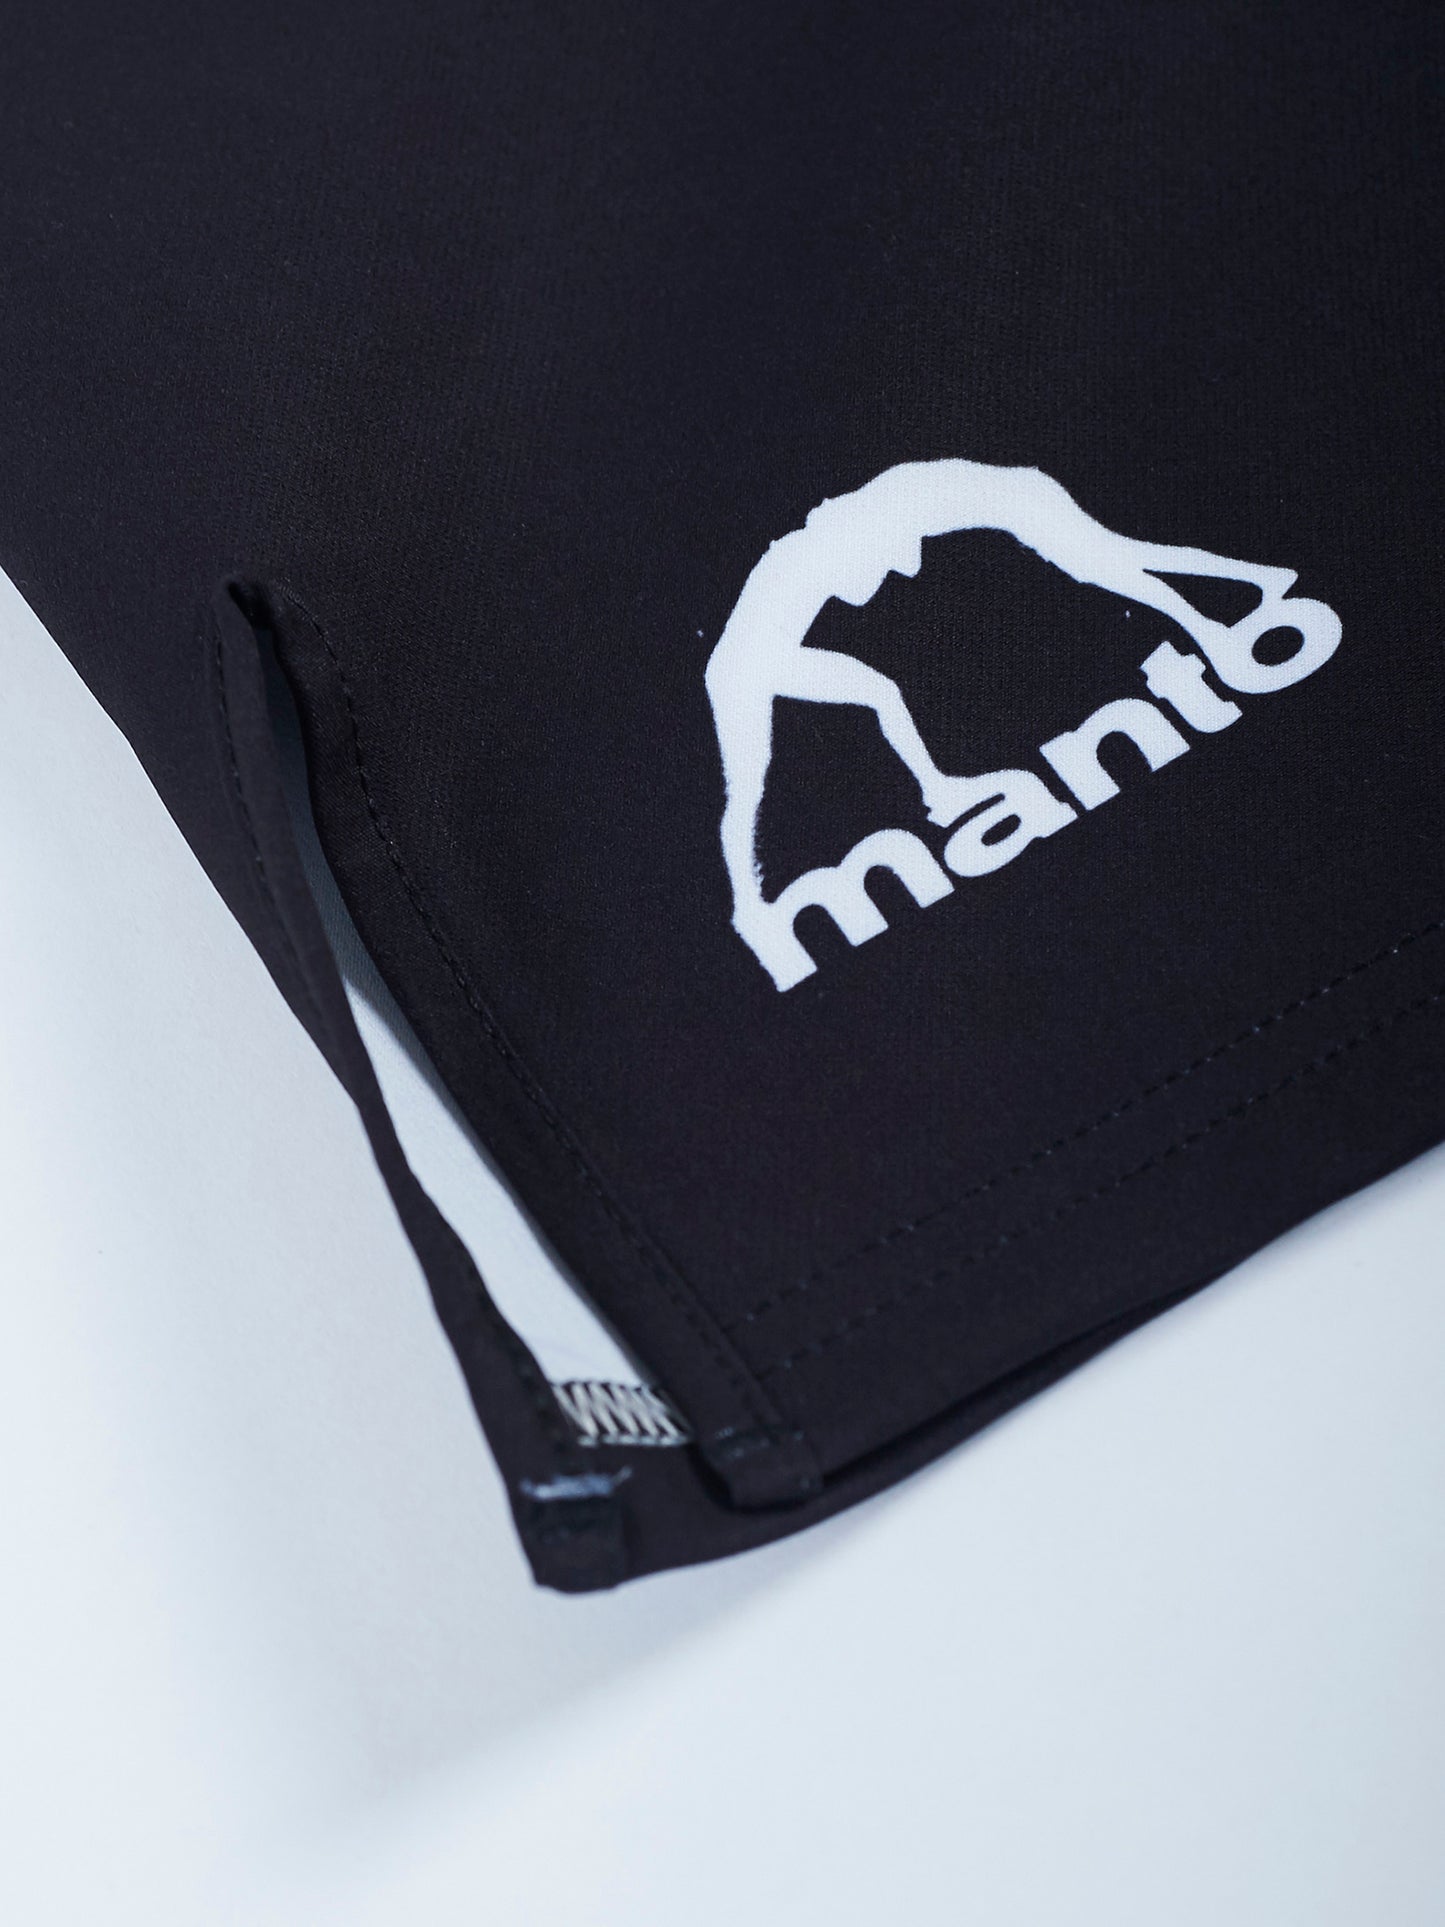 MANTO fight shorts TEMPLATE